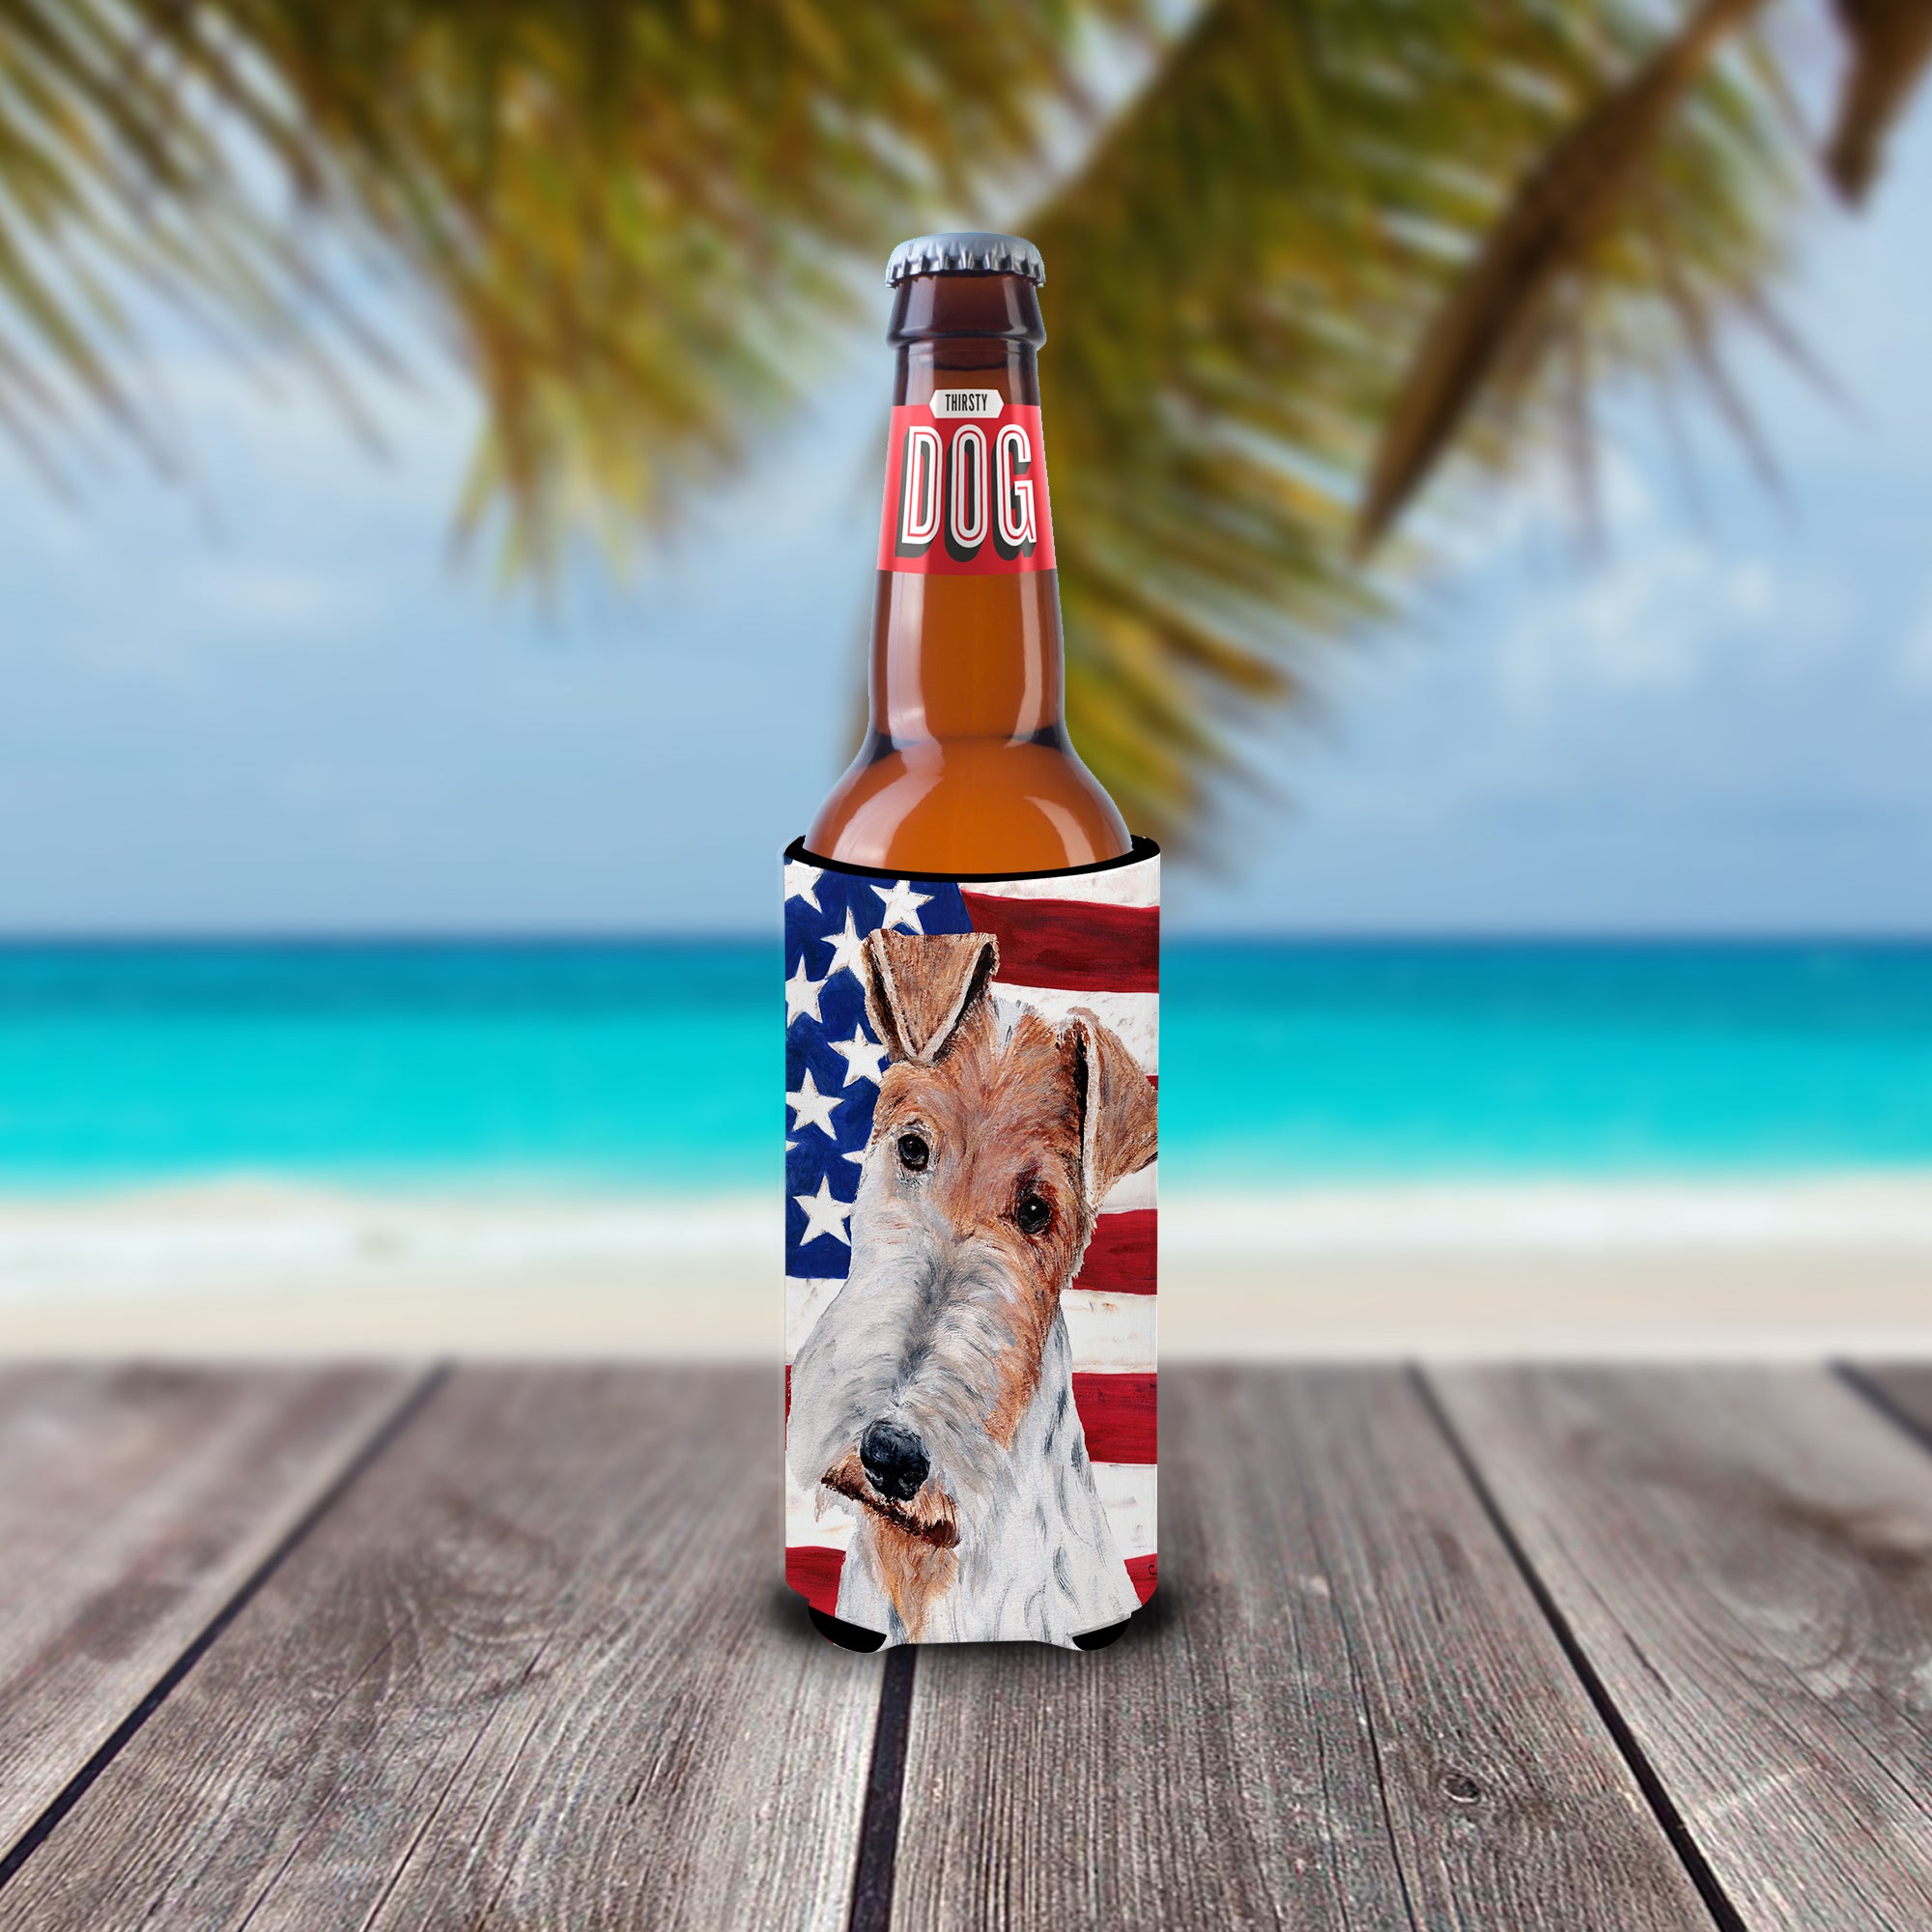 Wire Fox Terrier with American Flag USA Ultra Beverage Insulators for slim cans SC9628MUK